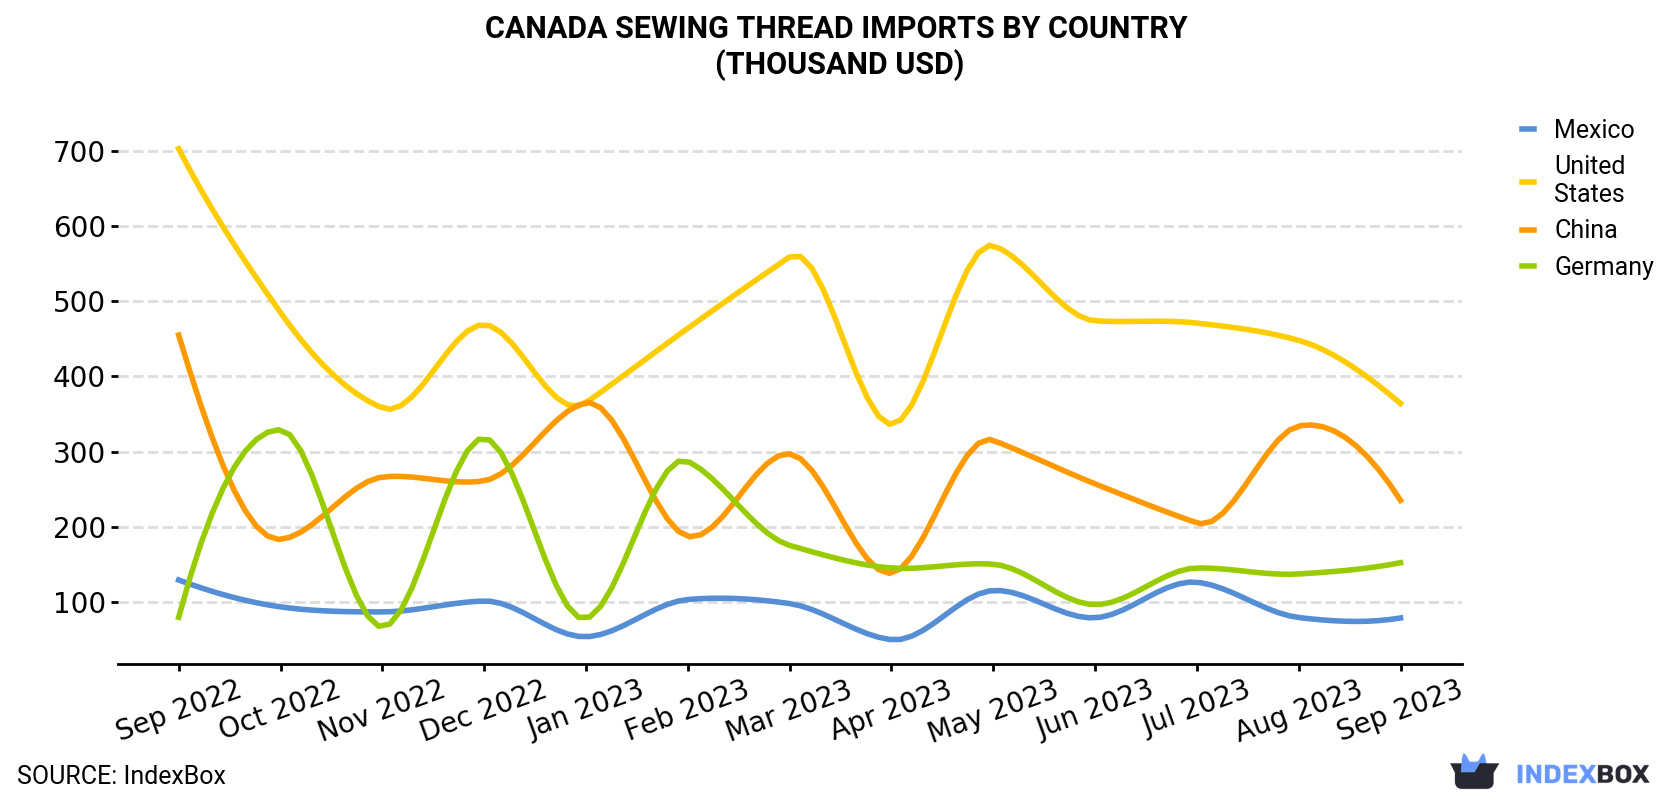 Canada Sewing Thread Imports By Country (Thousand USD)